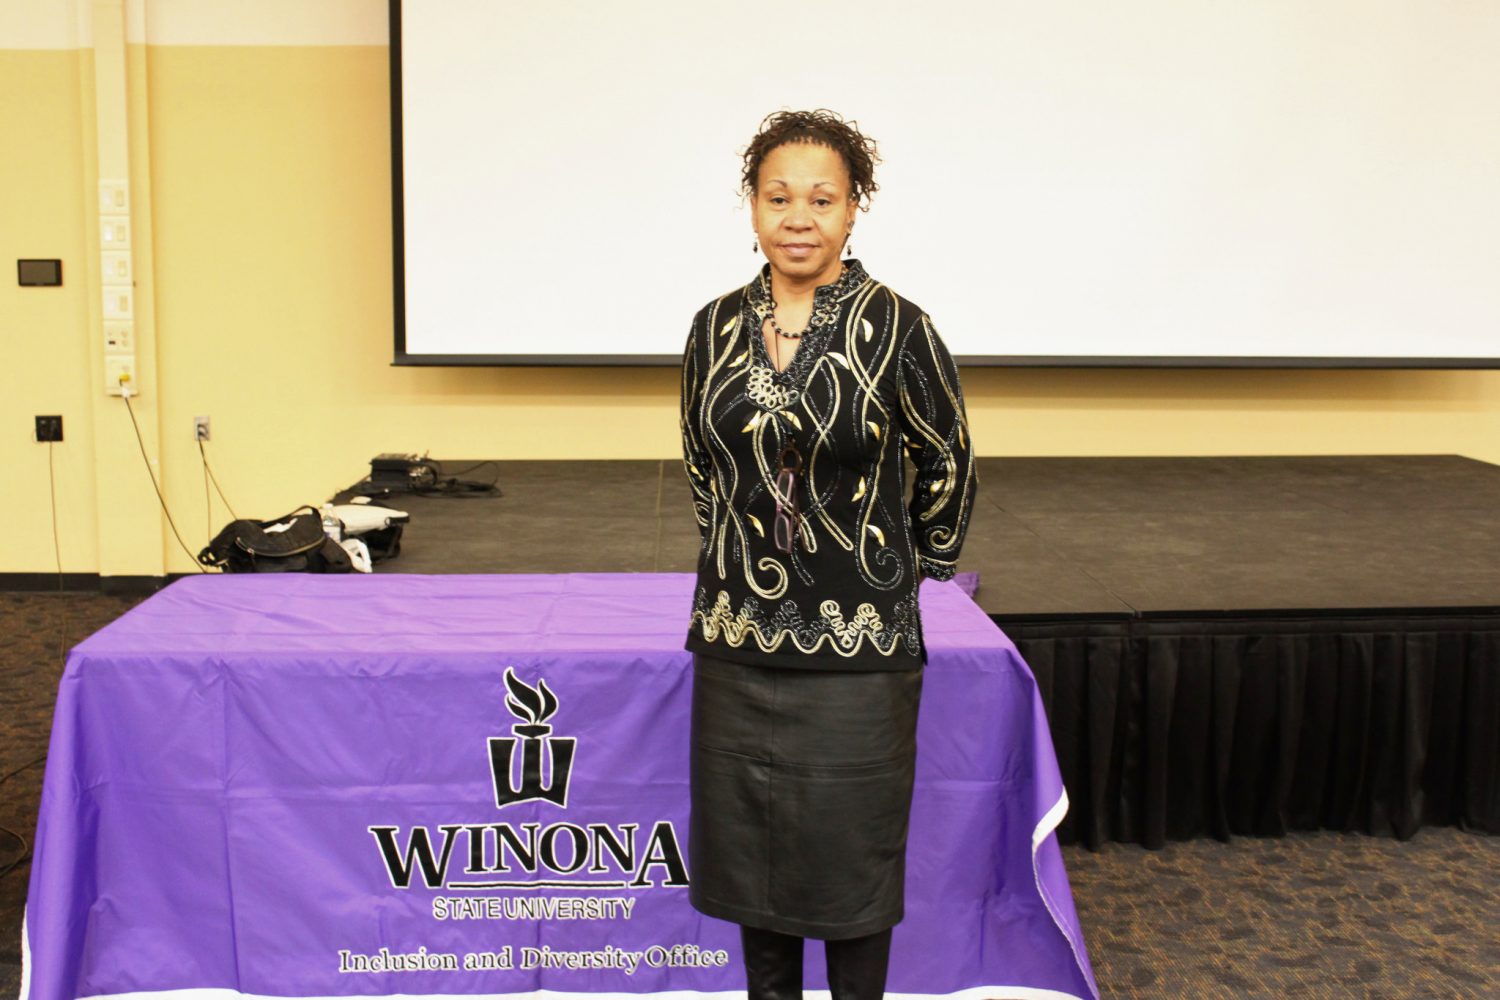 Last Thursday, Feb. 18, Winona State University Inclusion and Diversity hosted Joy 
DeGruy in honor of Black History Month. As a celebrated speaker about racism, DeGruy spoke at a workshop and keynote speech on race related issues in America today. In her keynote, DeGruy discussed the theory of Post Traumatic Slave Syndrome in African Americans today. Photo credit: Andrew Thoreson